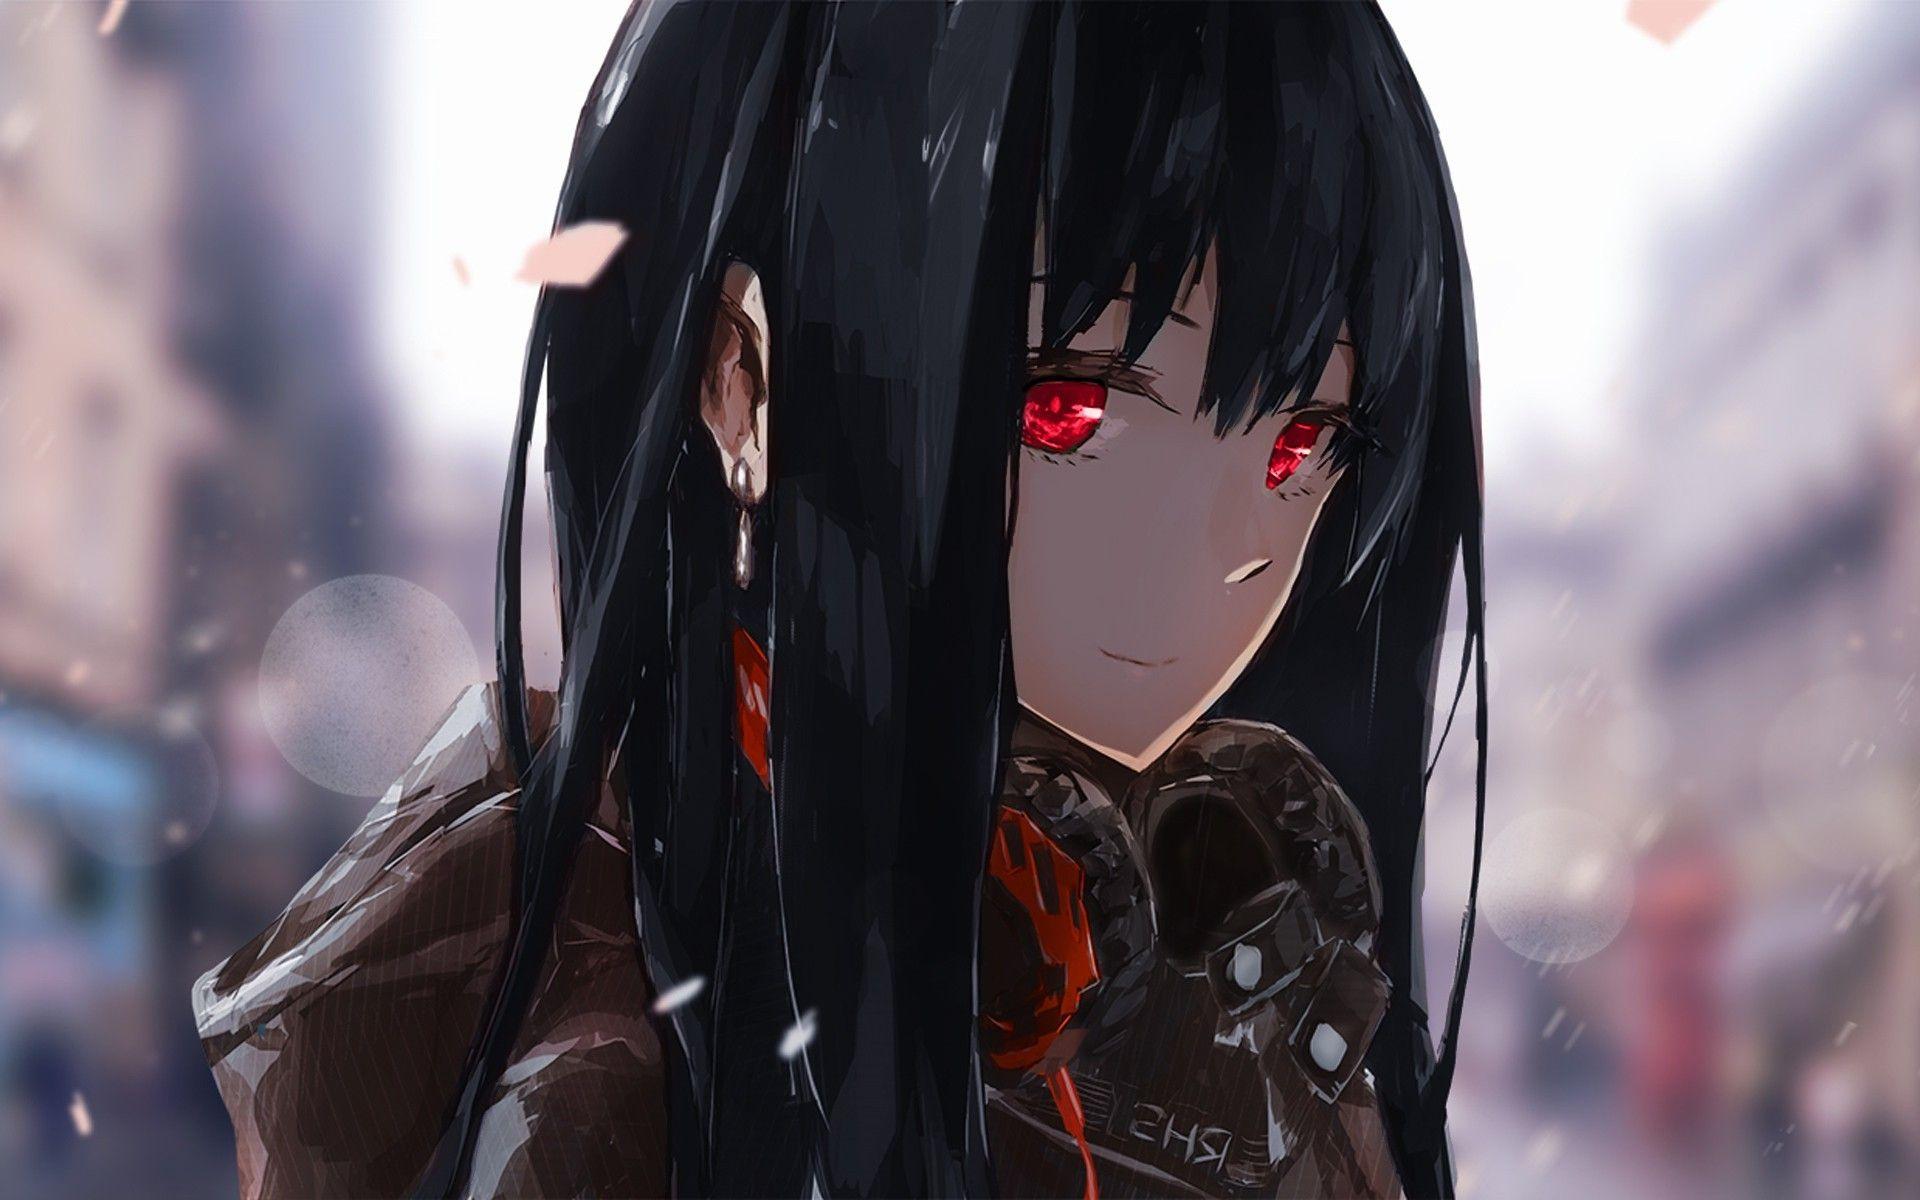 Anime Red Eyes Wallpaper Free Anime Red Eyes Background